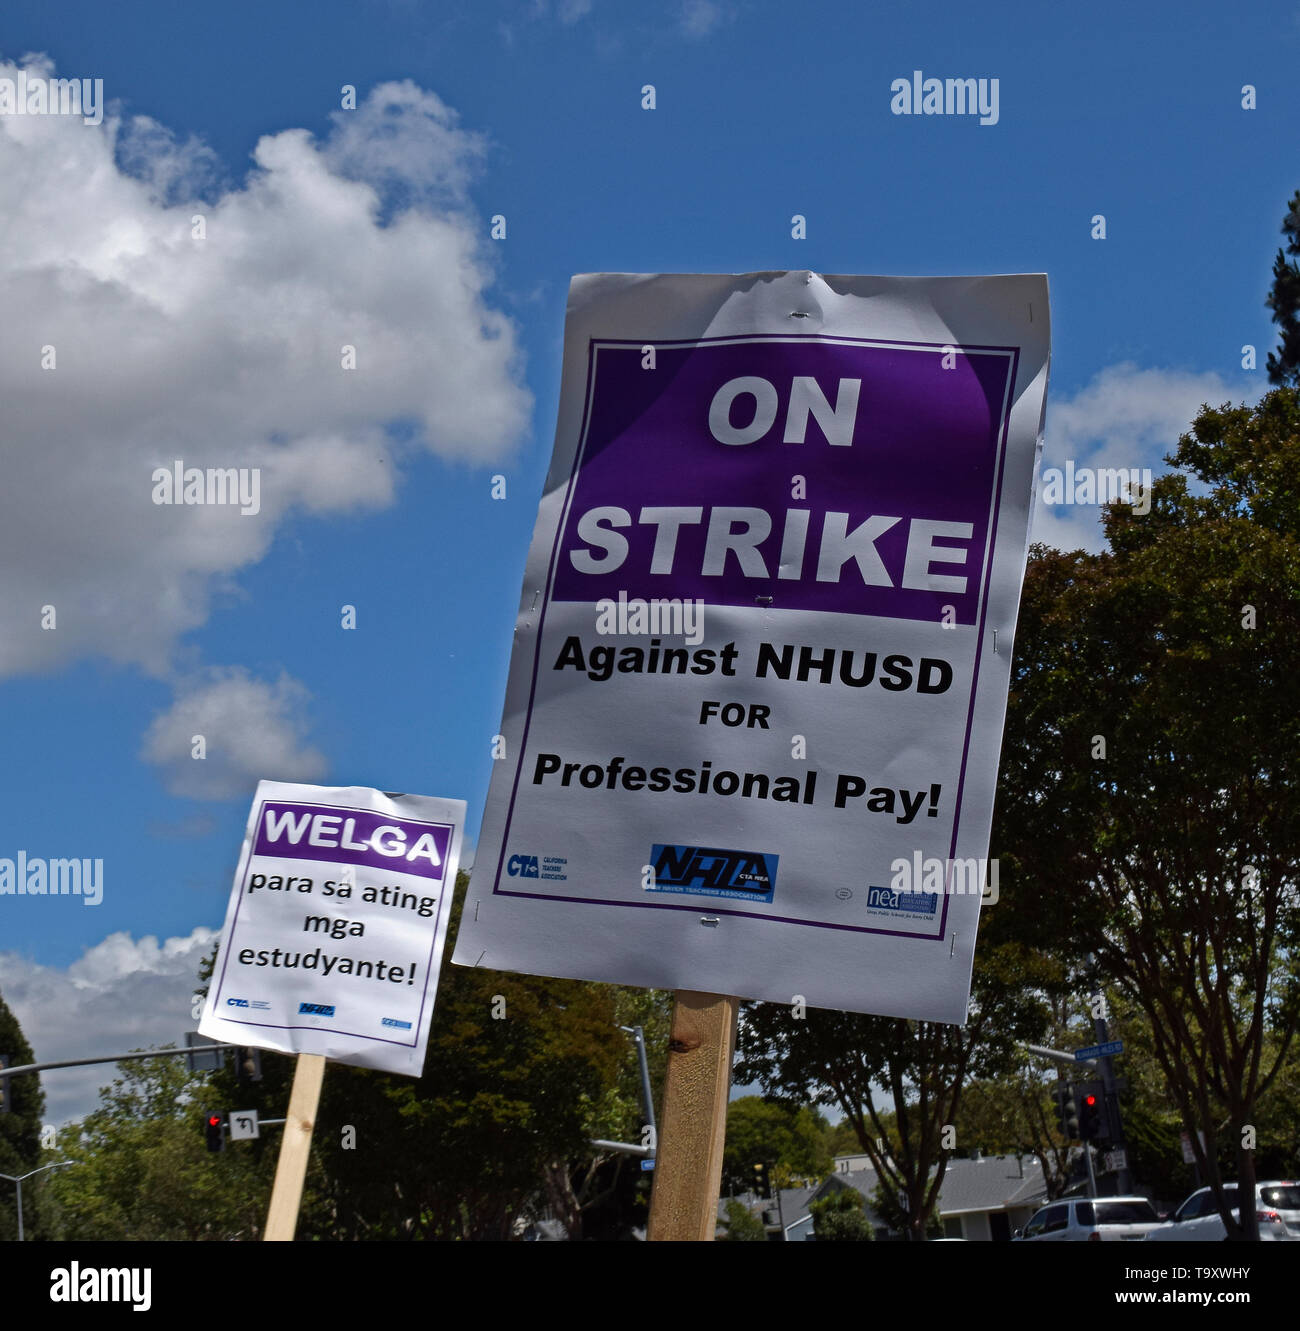 on strike picket signs in multiple languages, for professional pay, by New Haven Teachers Association against the New Haven Unified School District in Union City, California, on May 20, 2019 Stock Photo